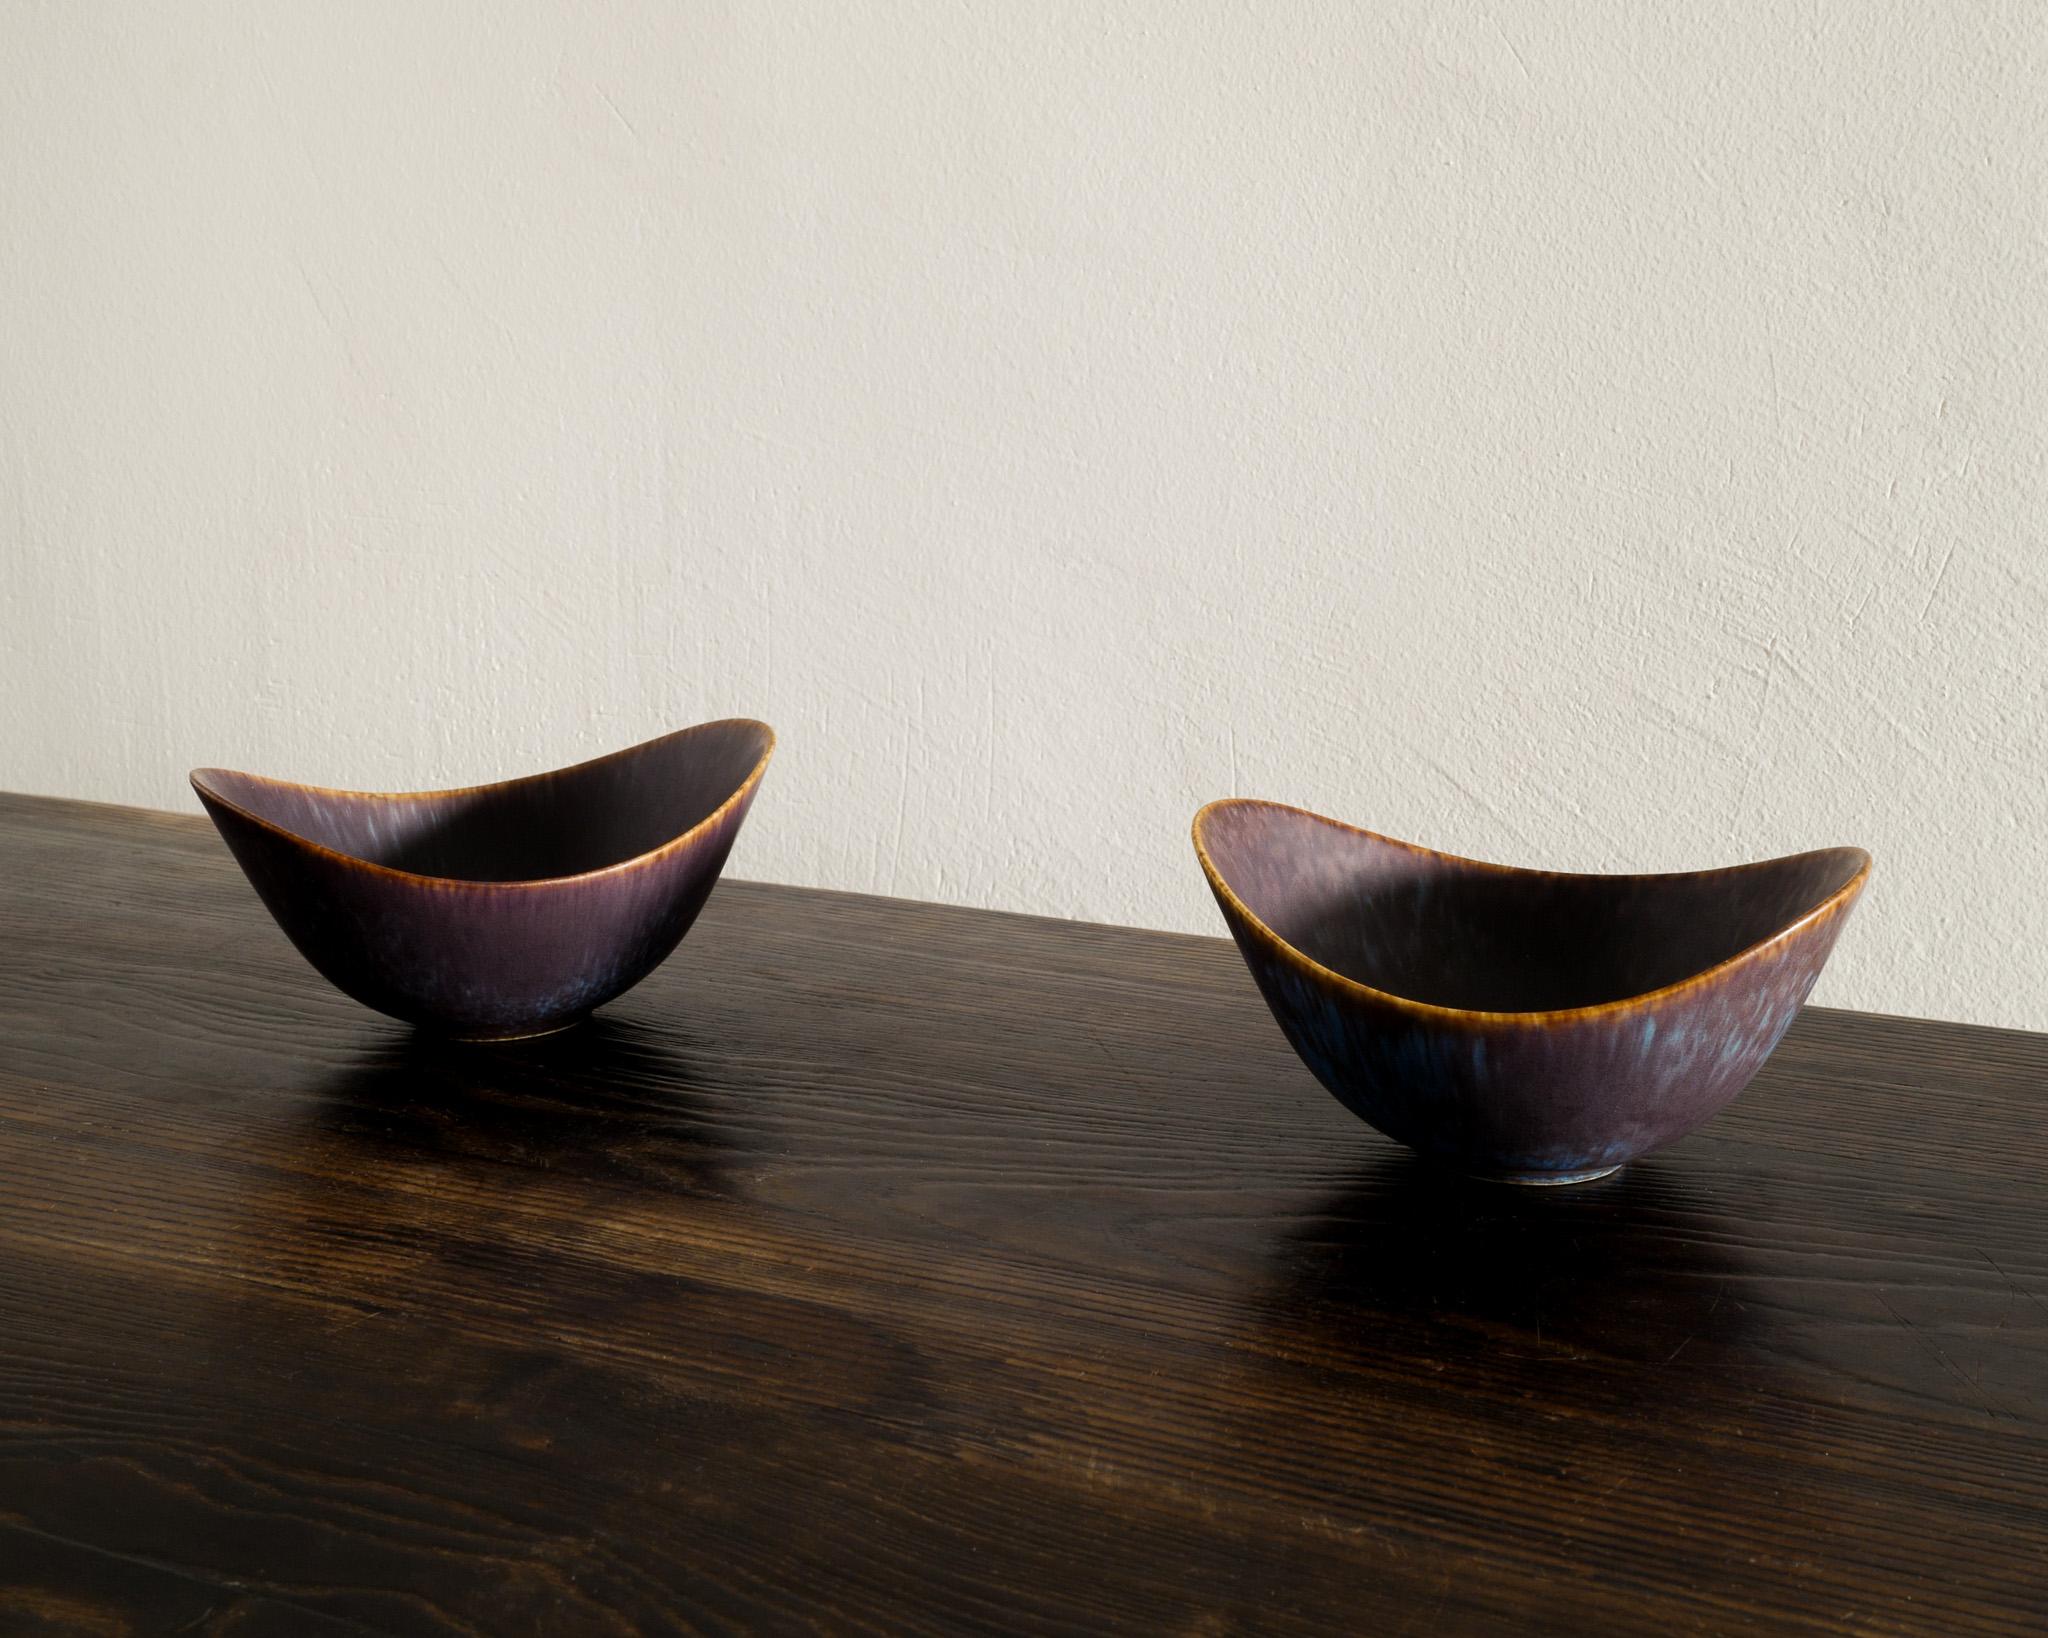 Rare pair of ceramic / stoneware bowls in blue brown glaze by Gunnar Nylund produced by Rörstrand Sweden 1950s. In good condition. Signed 